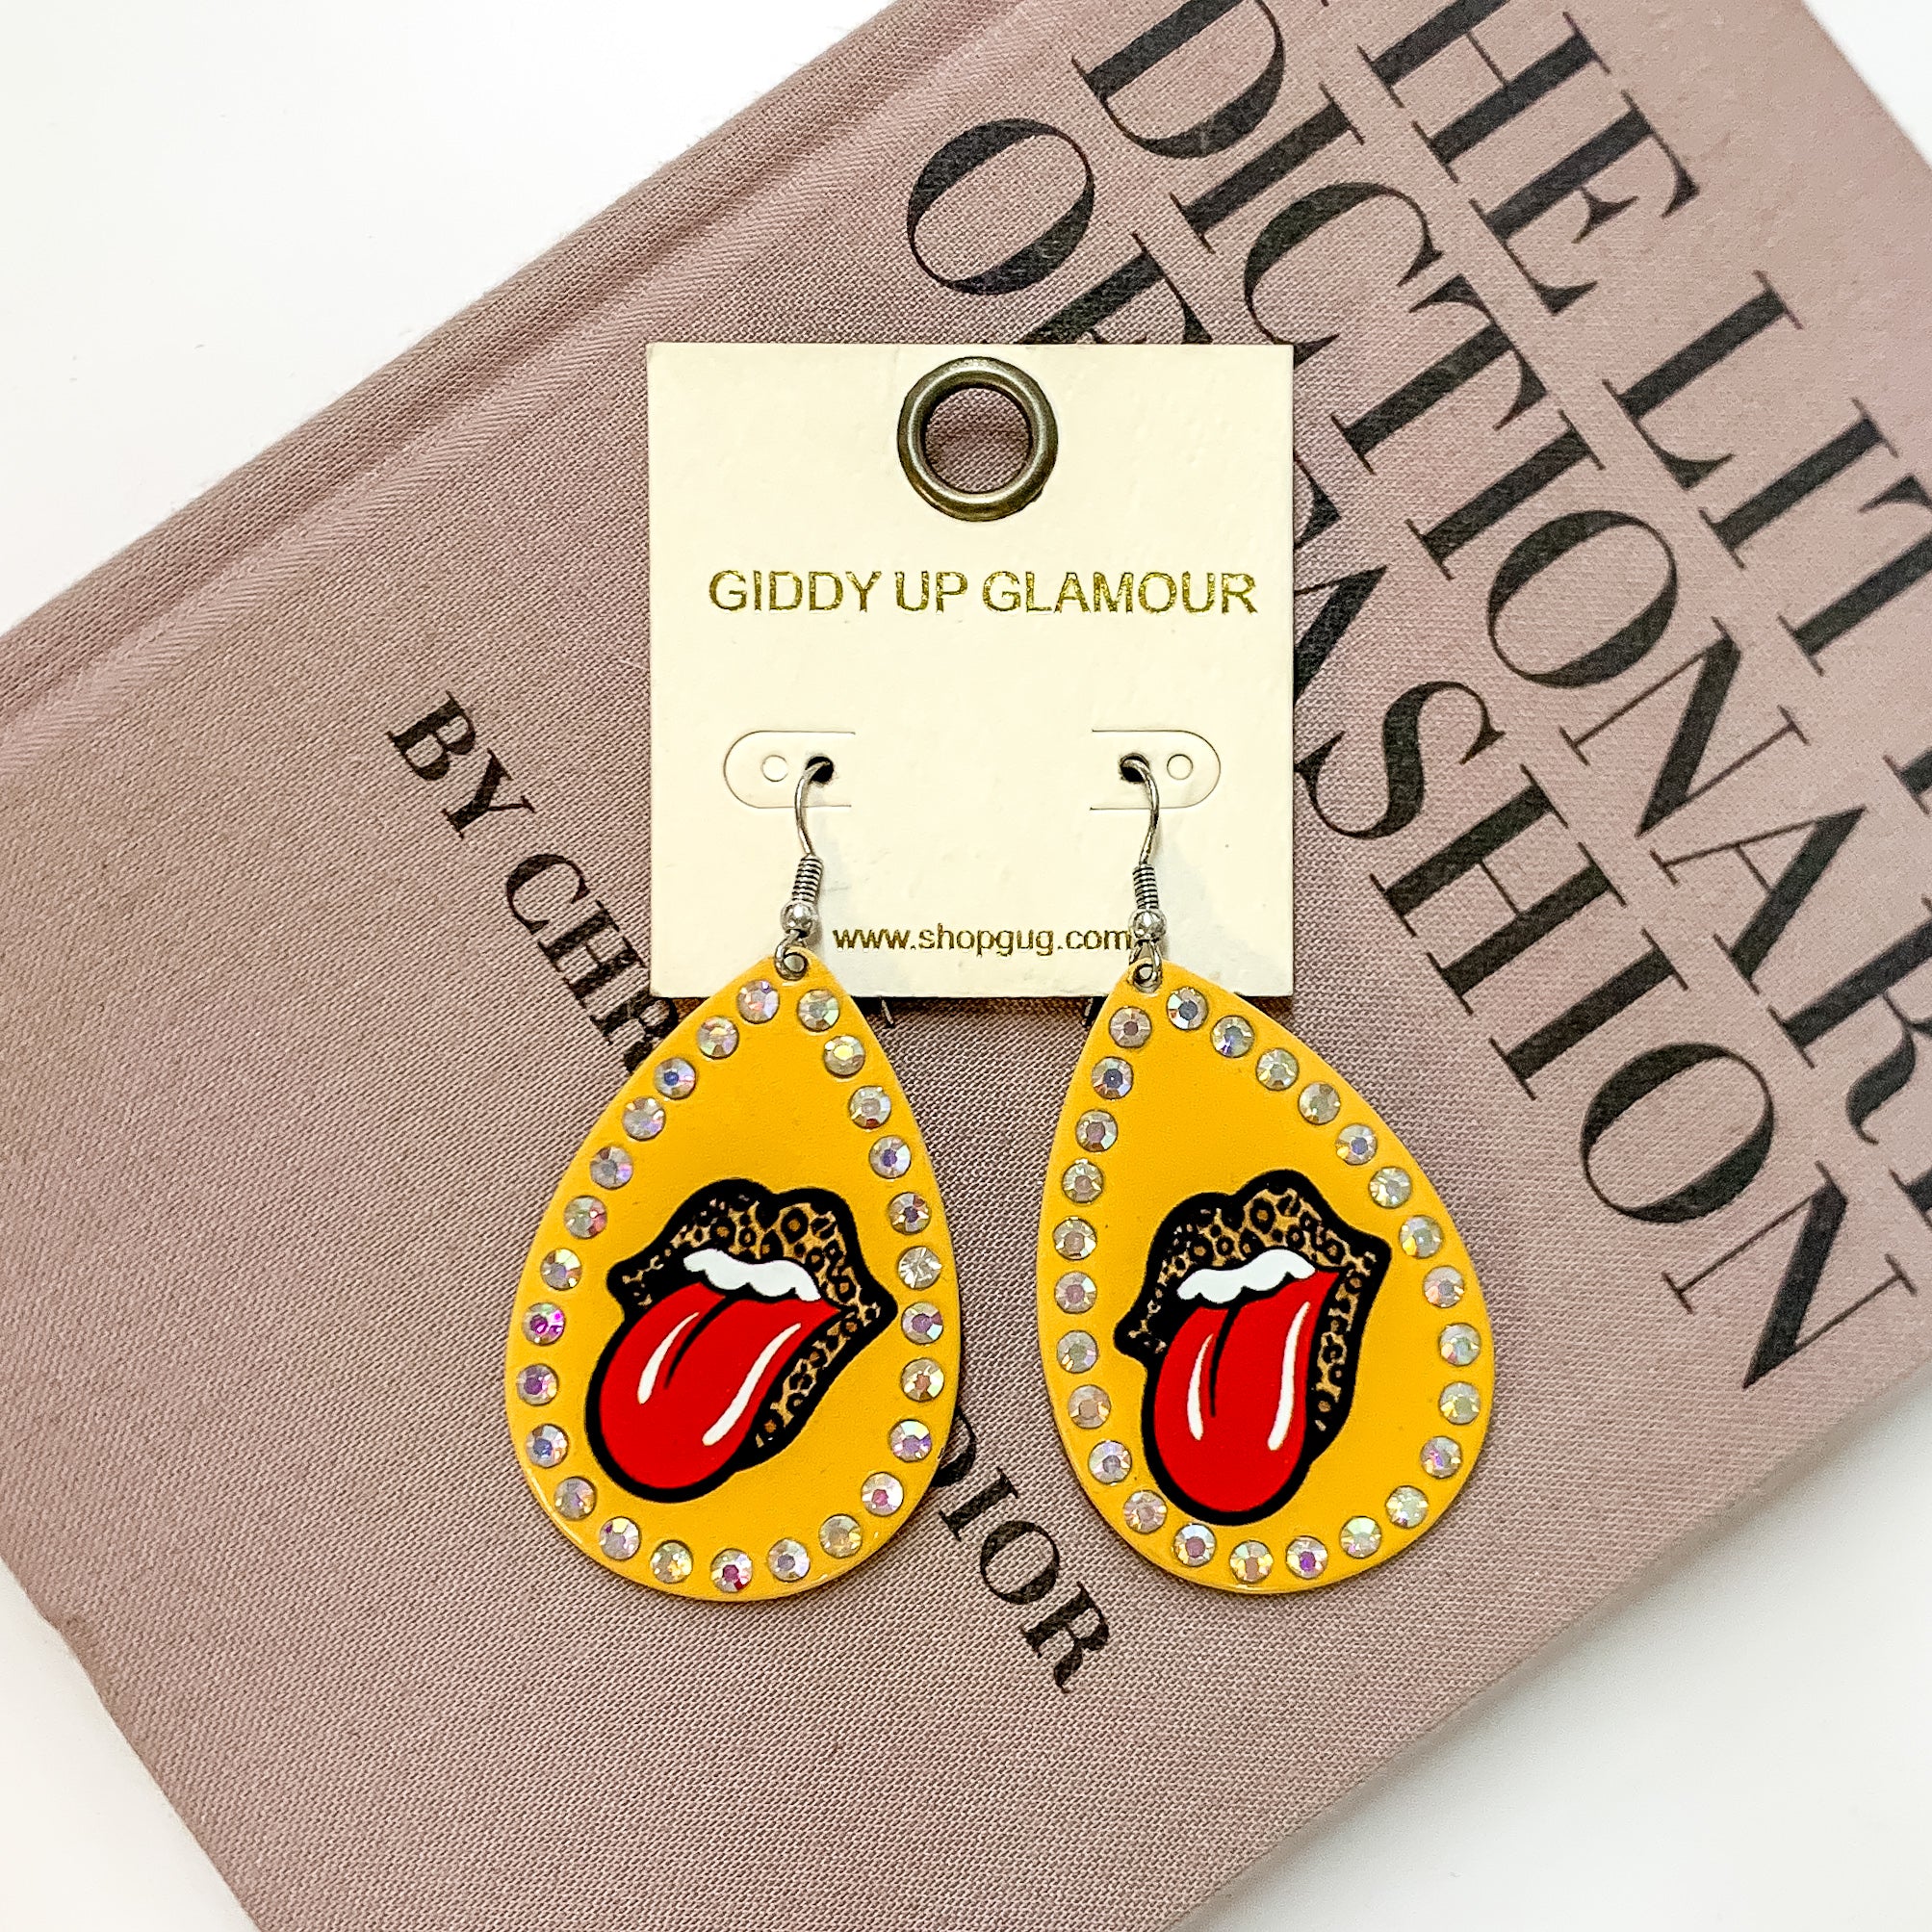 Rock On Metal Teardrop Earrings with Leopard Print in Mustard Yellow - Giddy Up Glamour Boutique